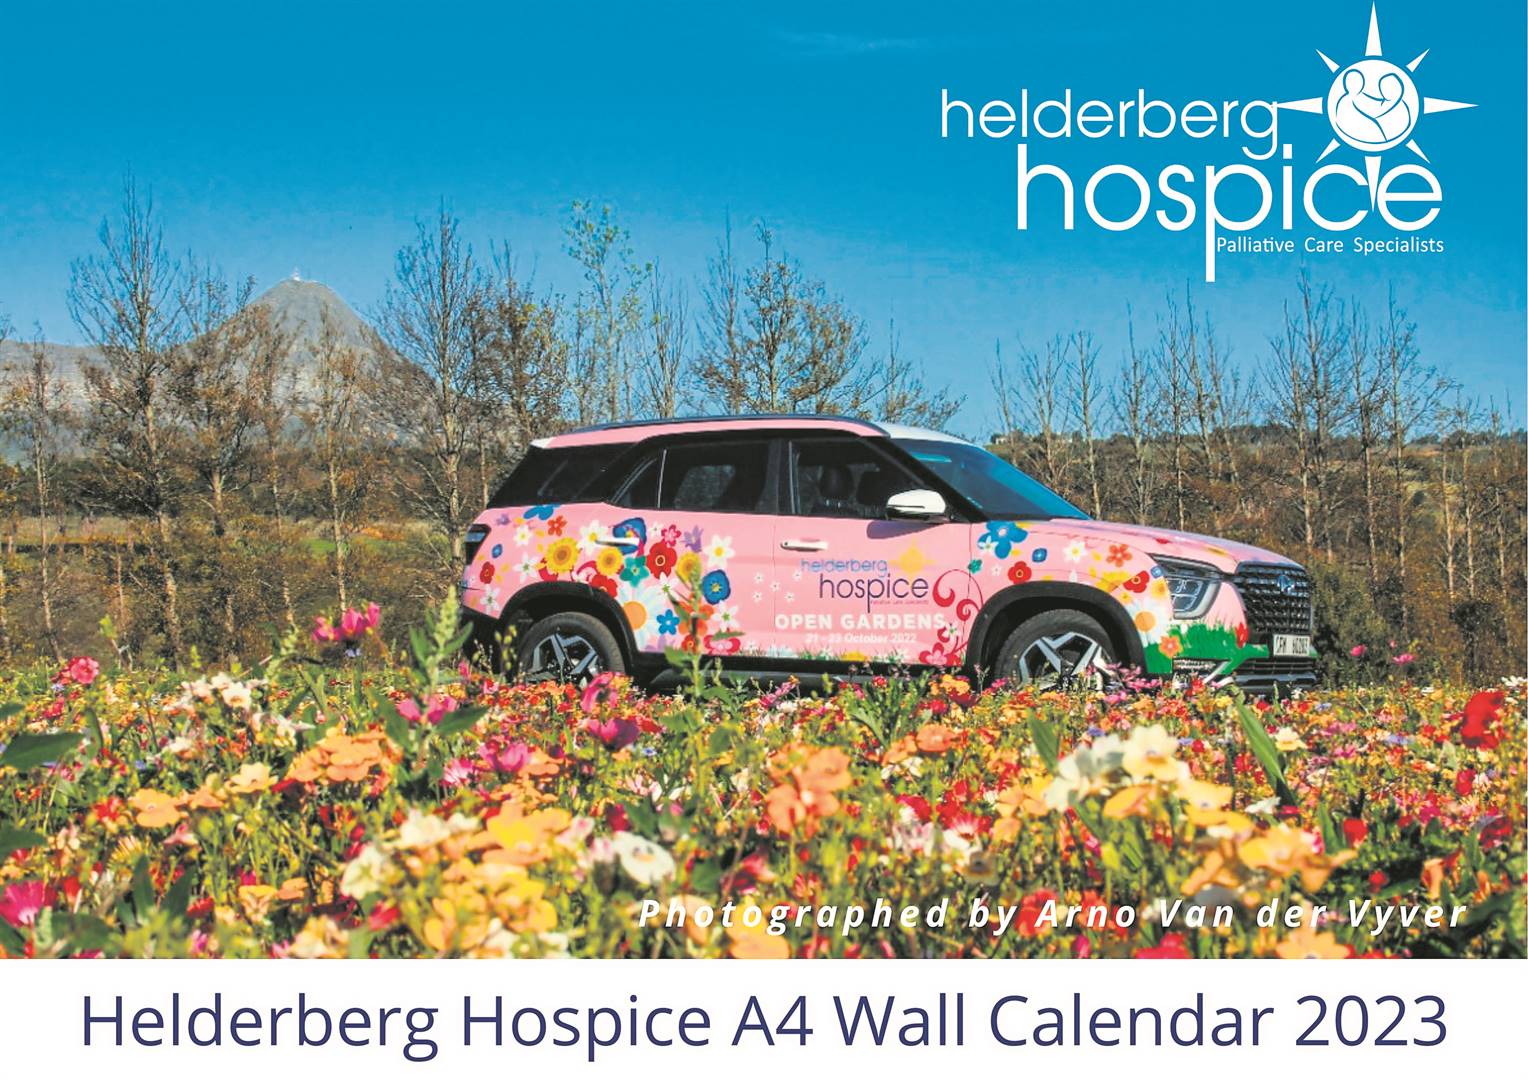 Helderberg Hospice has provided the community with palliative care for more than 35 years, providing those diagnosed with life limiting illnesses and their loved ones specialised skill, compassion and dignity. Support from the community allows hospice to provide equitable care when it matters most. To this end, a beautiful 2023 A4 calendar, to help you with the planning of your busy life and remind you to schedule regular down time, is available now. Those living the basin are surrounded by many beautiful places, so local photographer Glenda Watling captured stunning images of the area, which will remind calendar owners to stop and take some personal time each month. The calendar is available from Helderberg Hospice in Old Stellenbosch Road, Somerset West, the Helderberg Hospice shops in Somerset West and Strand, and Sage and Thyme coffee shop at Circle Centre, Somerset West, and costs R150. Contact Celéstine on 076 062 5855 for further details.